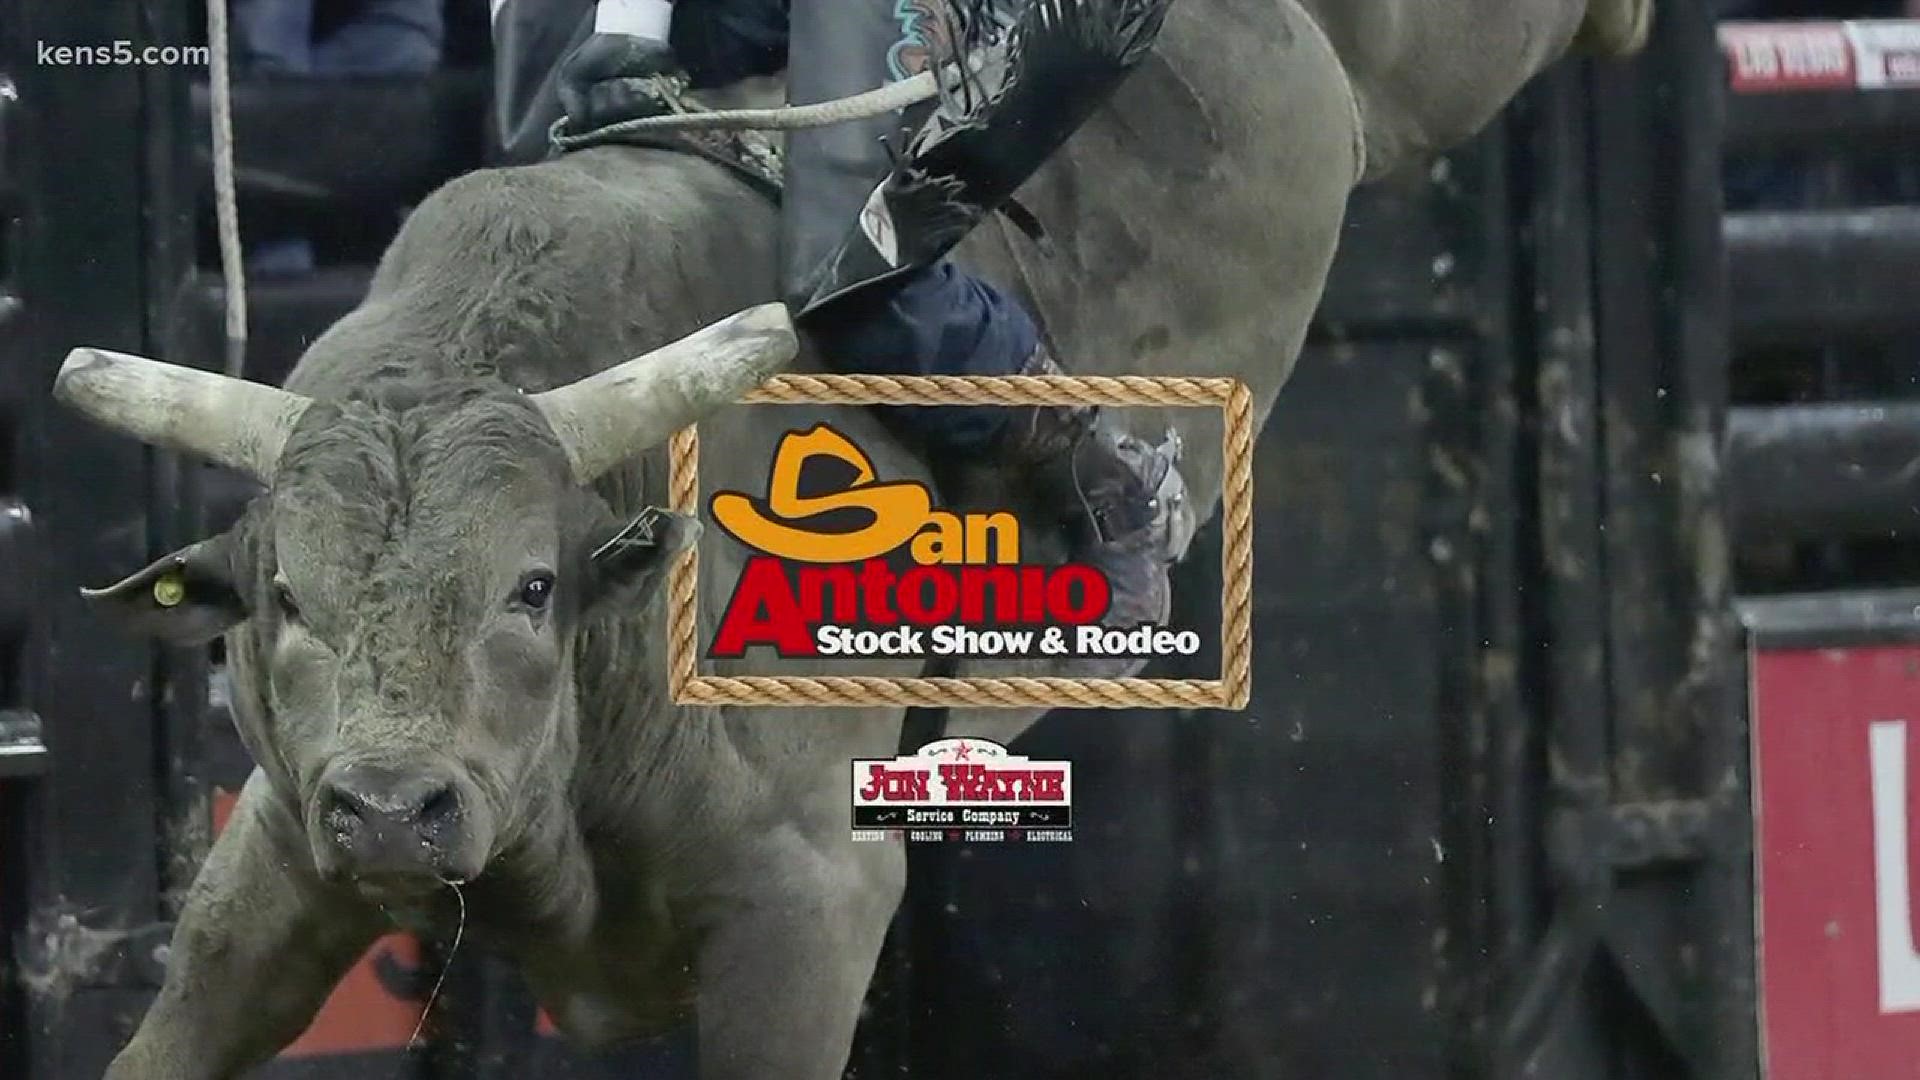 Catch the highlights from Sunday's Mutton Bustin' competition at the Rodeo!